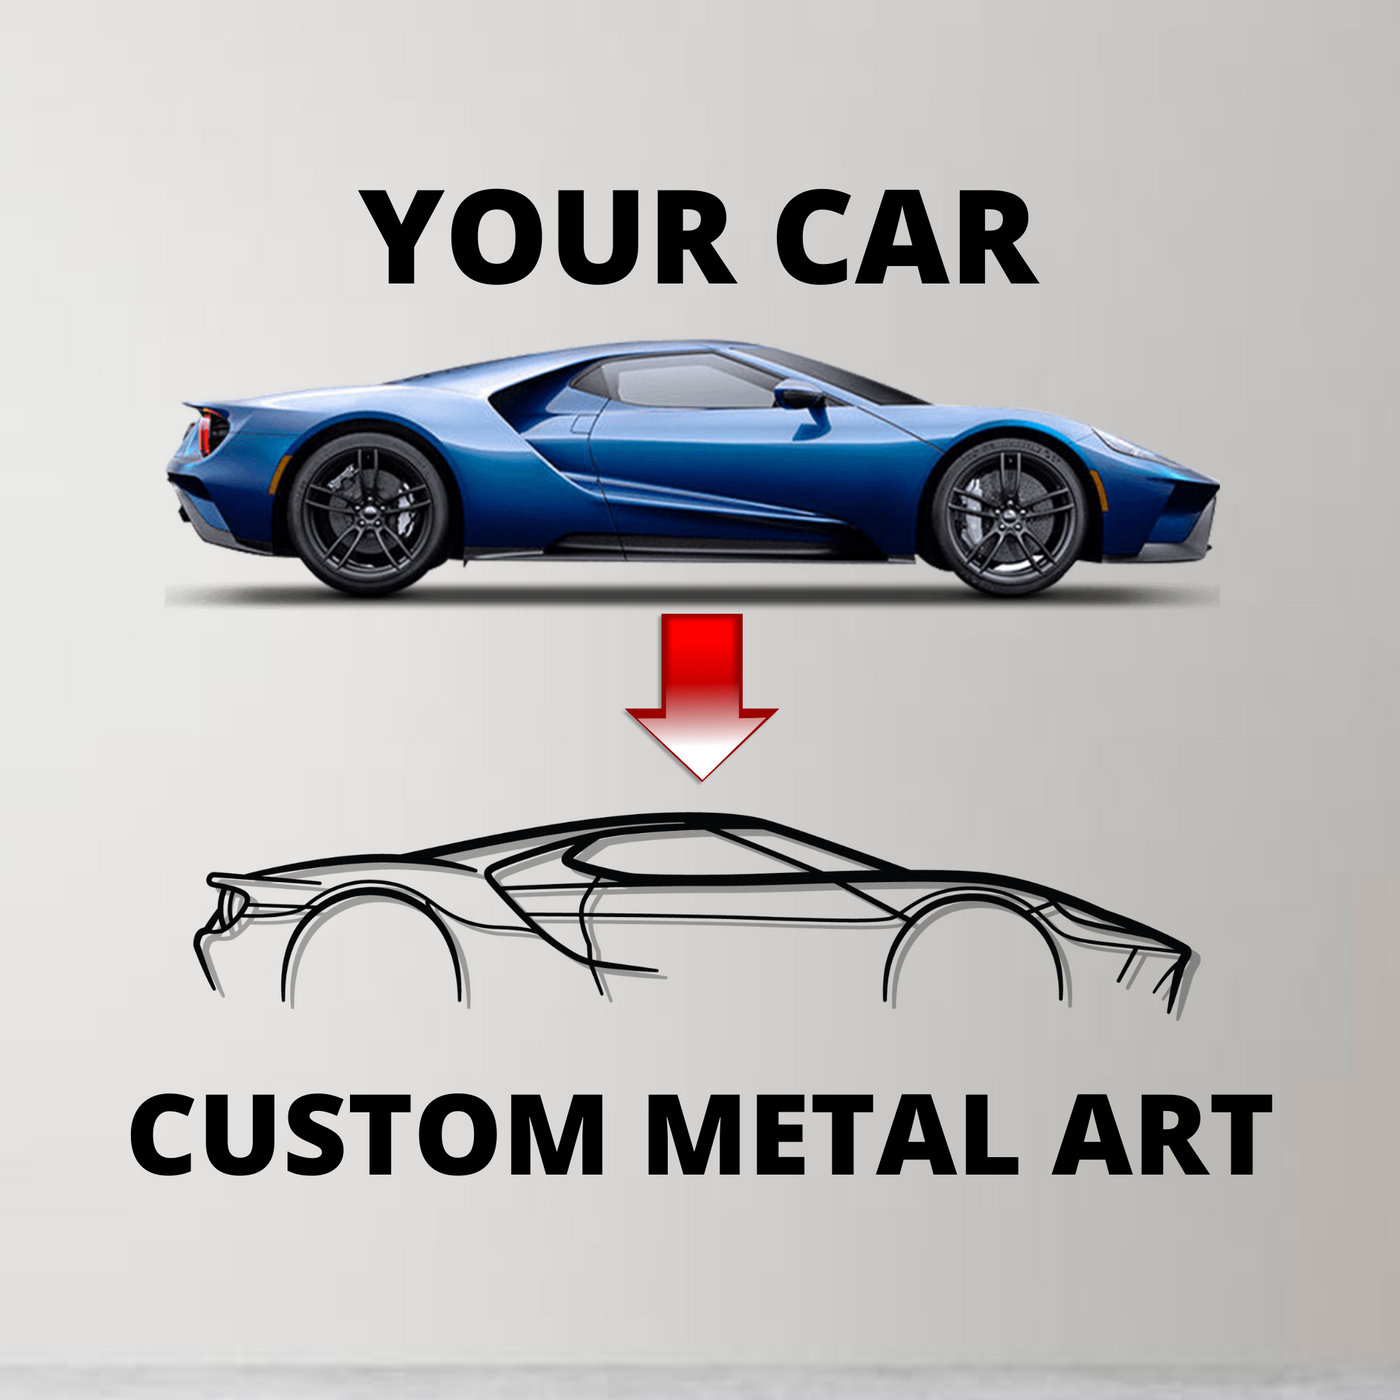 Mustang GT 2010 Cabrio Detailed Silhouette Metal Wall Art